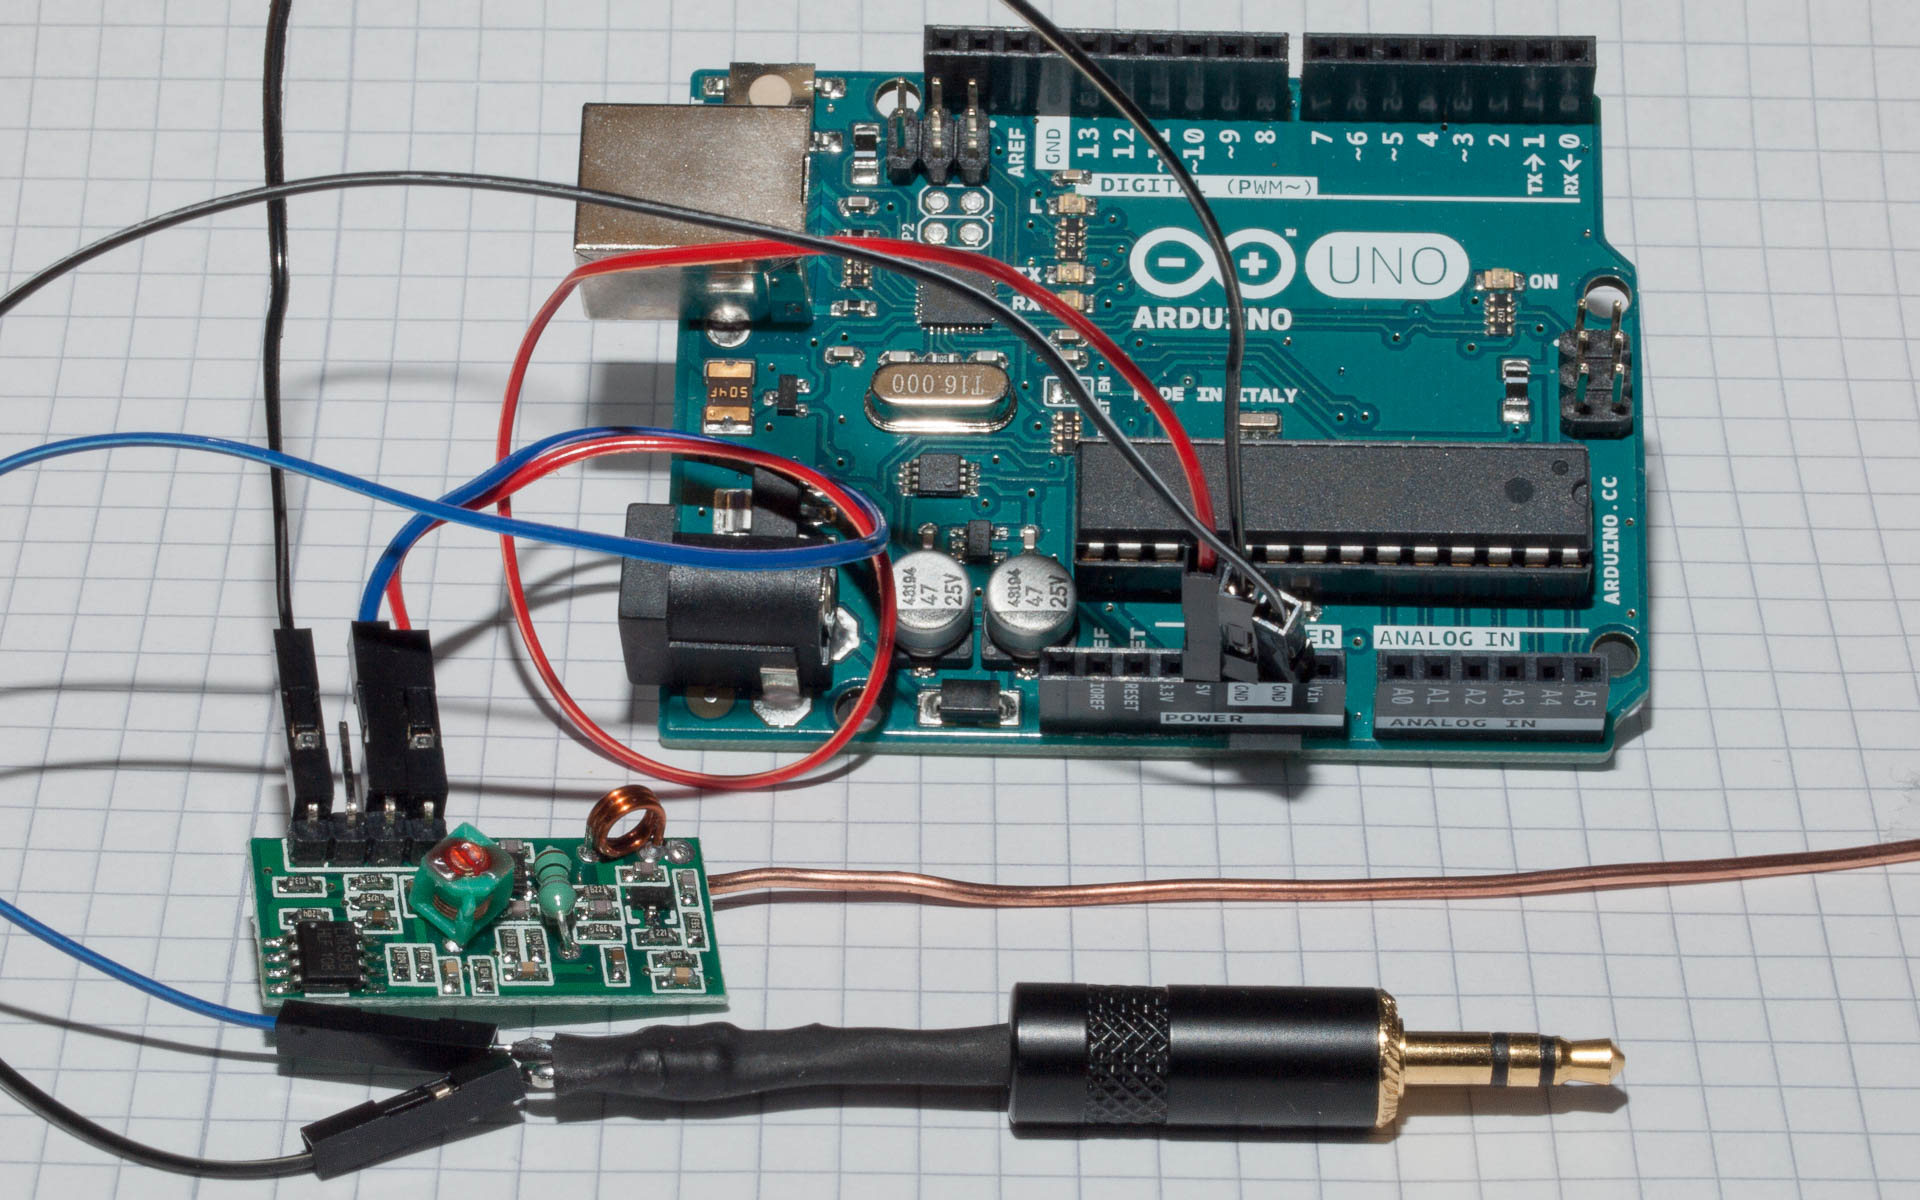 RF 433 MHz receiver for analyzing with Audacity (with an Arduino Uno as 5V power supply)